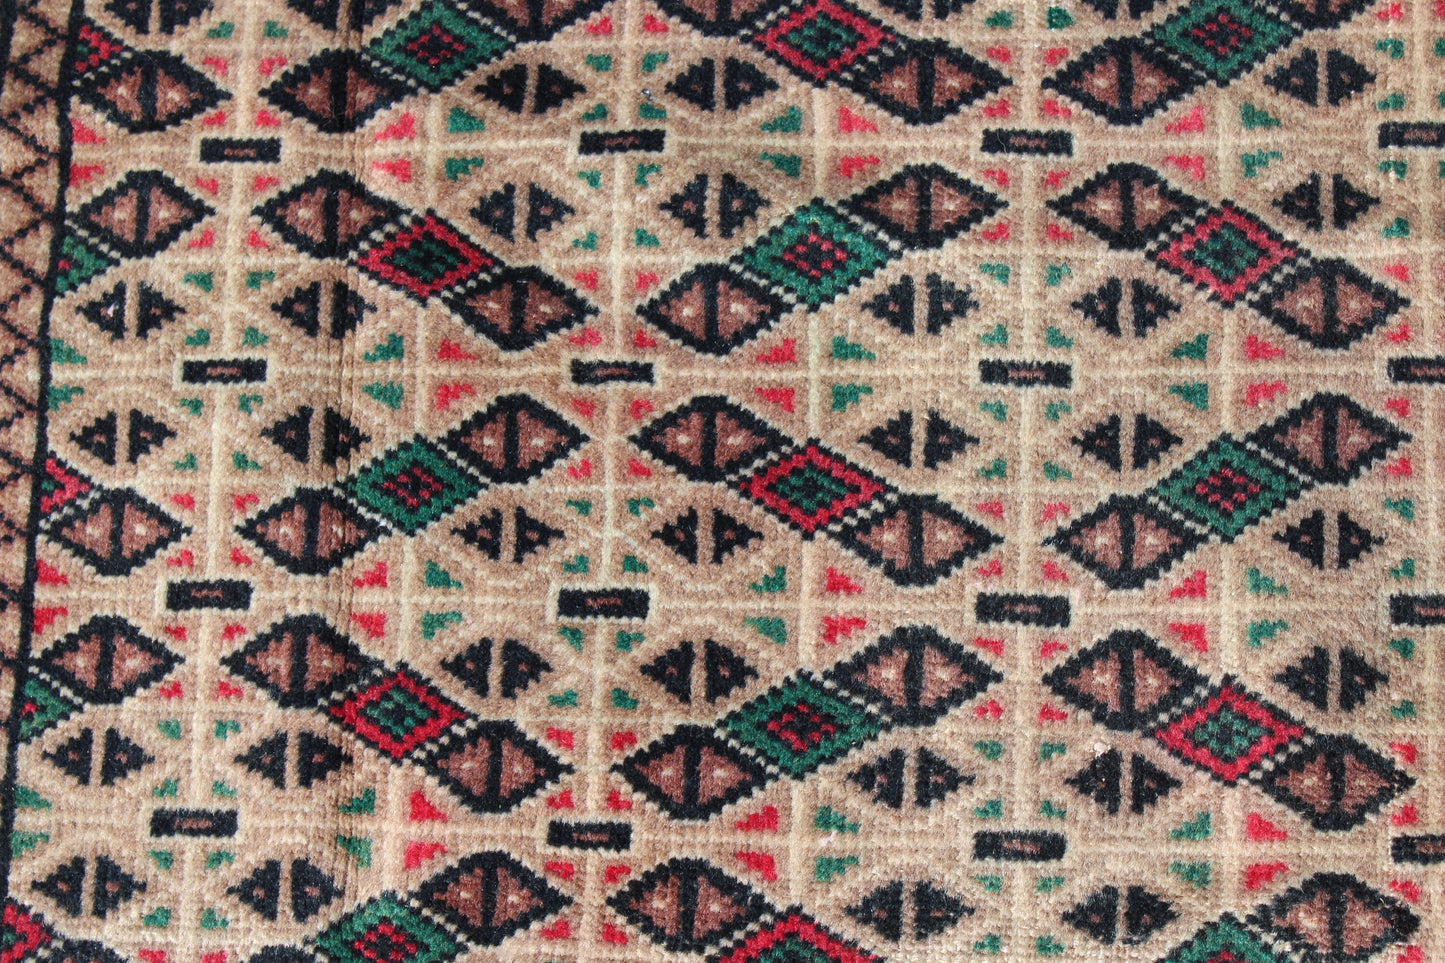 Cream Area Rug with Red Green Geometric Designs